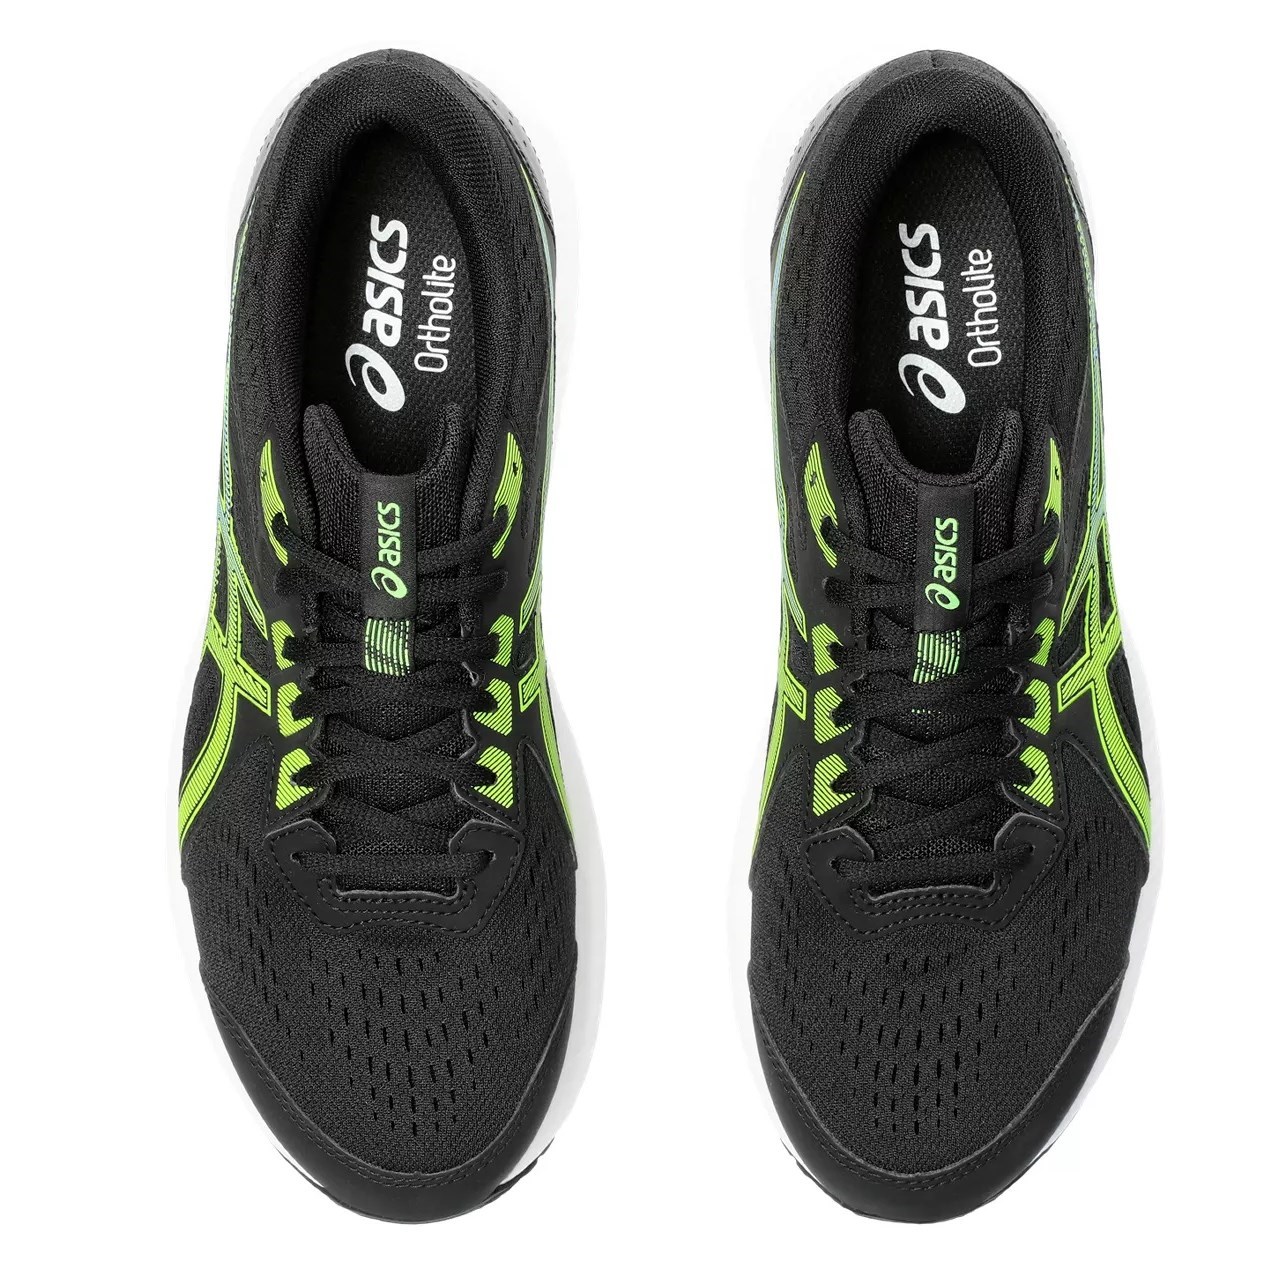 Asics Gel Contend 8 - Mens Running Shoes - Black/Electric Lime | Sportitude